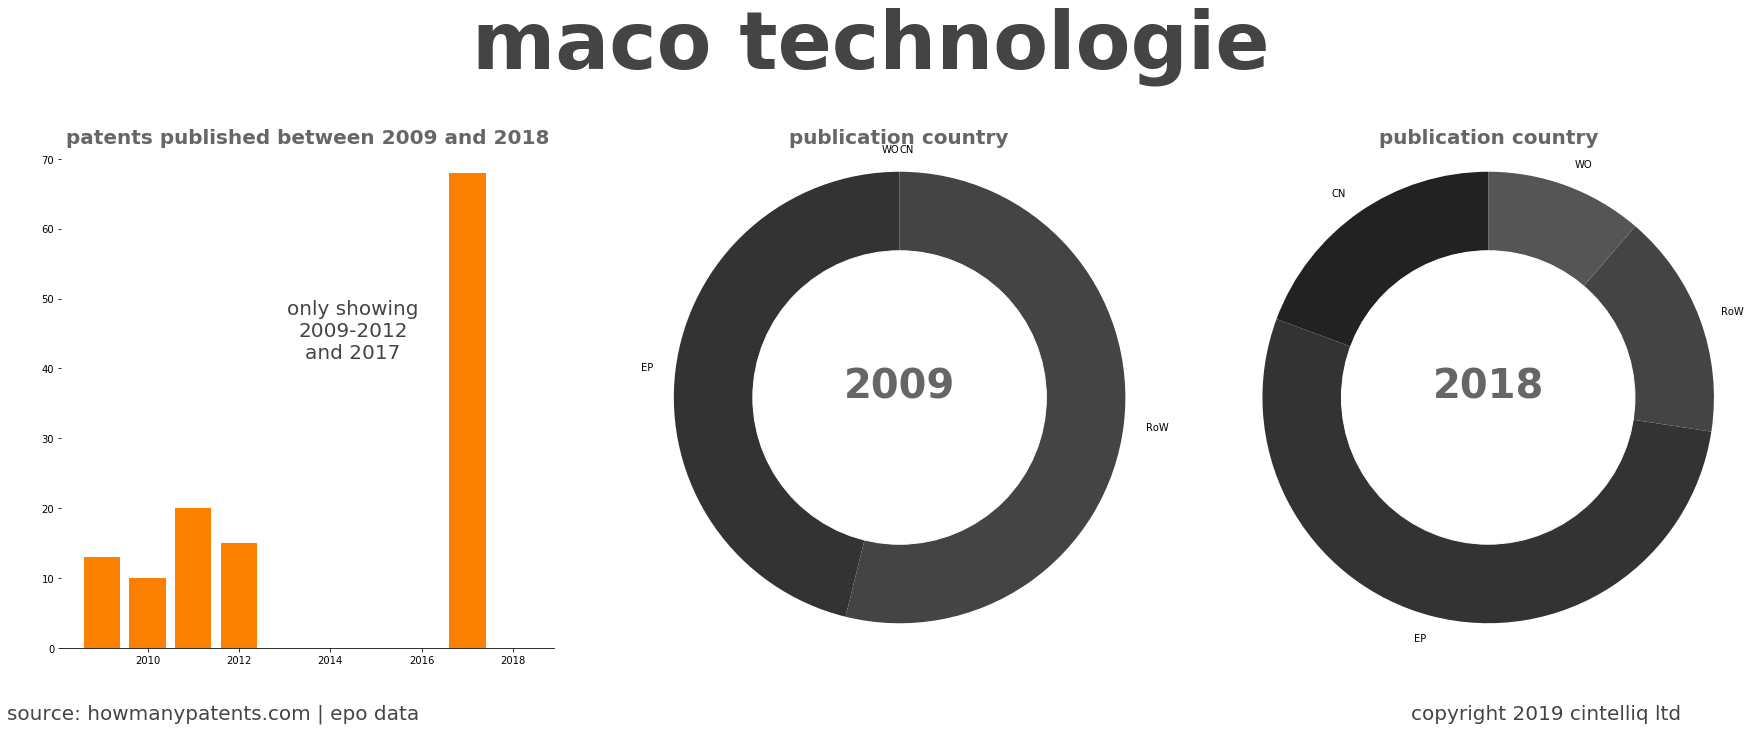 summary of patents for Maco Technologie